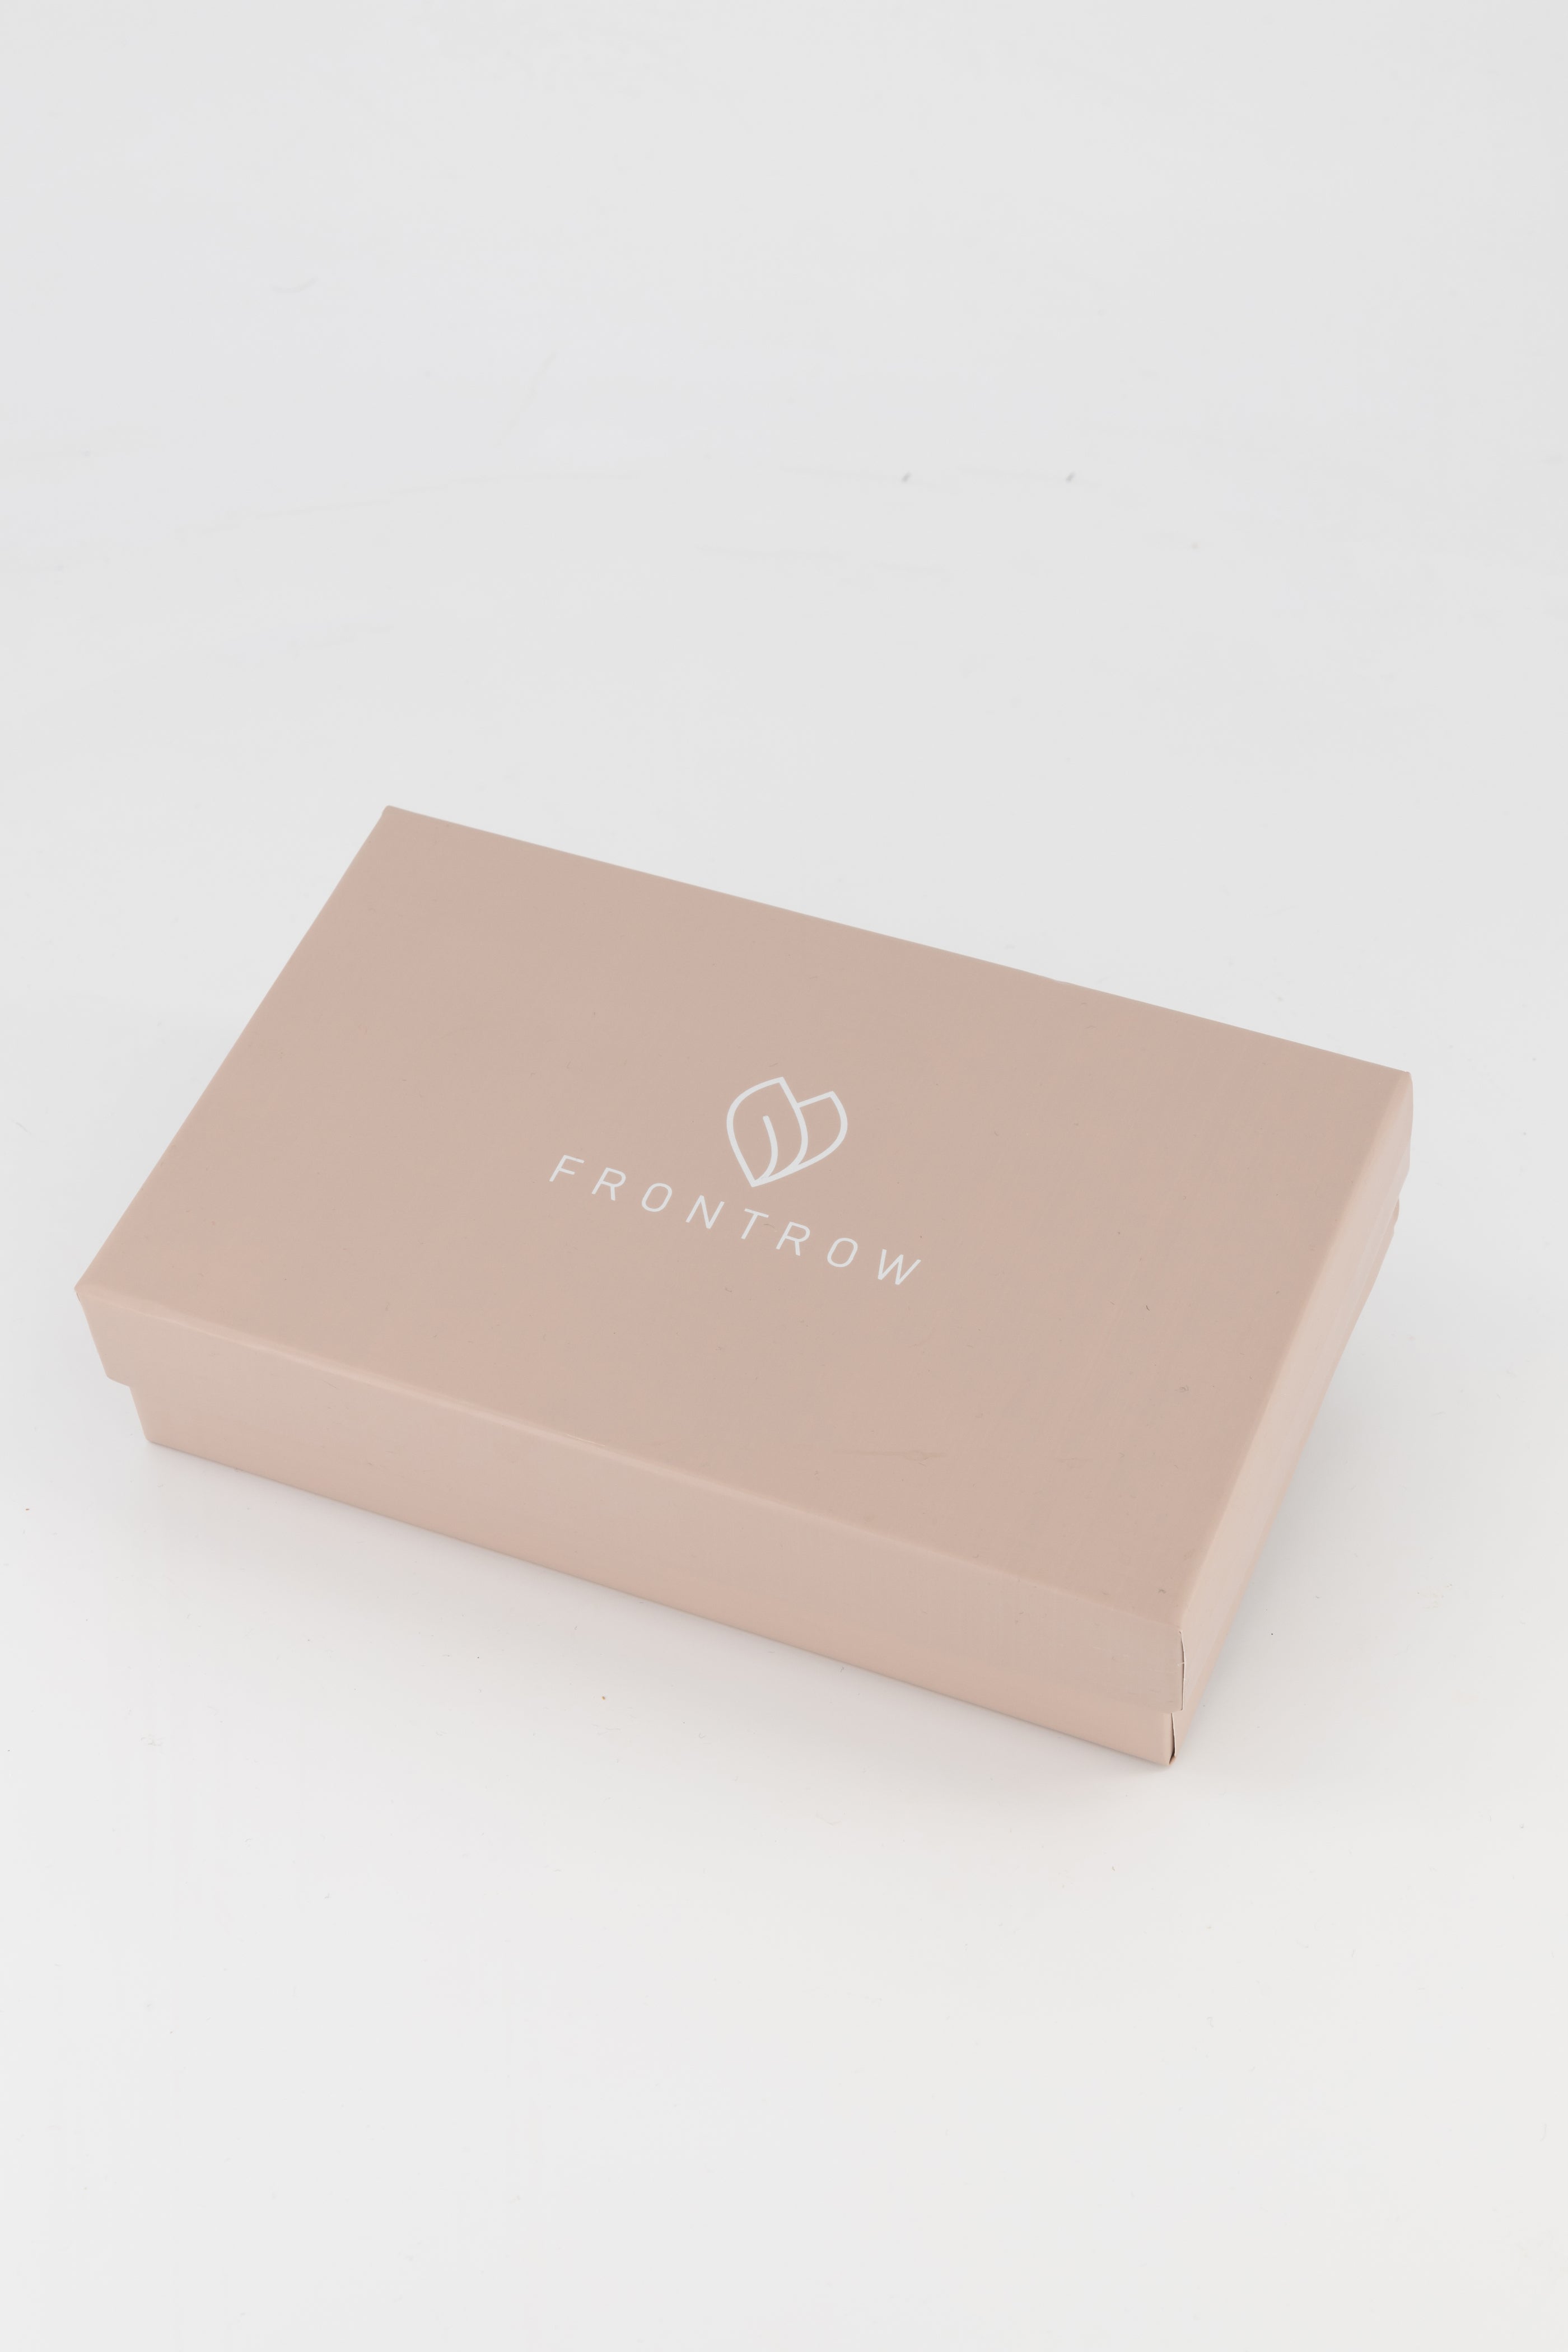 Frotnrow clip-in hair extensions packaging box